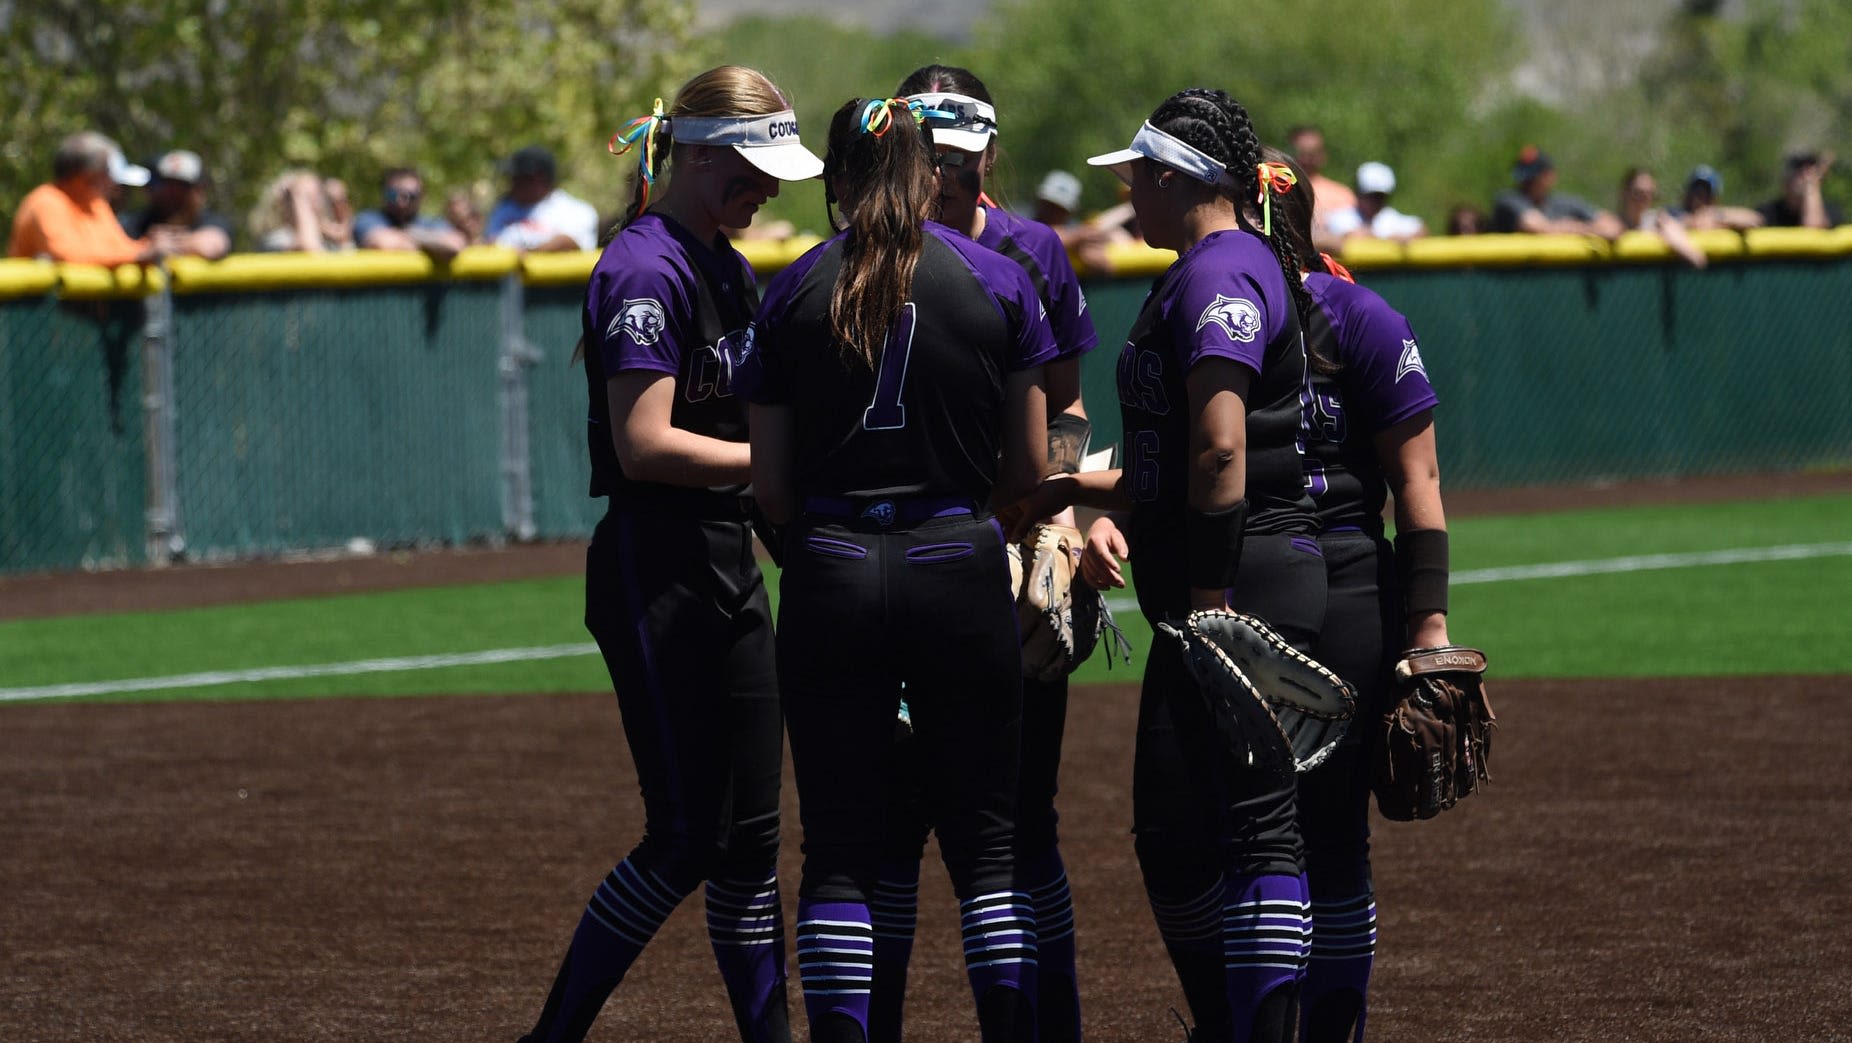 Nevada high school state softball playoffs: Douglas looks to repeat; see all schedules here